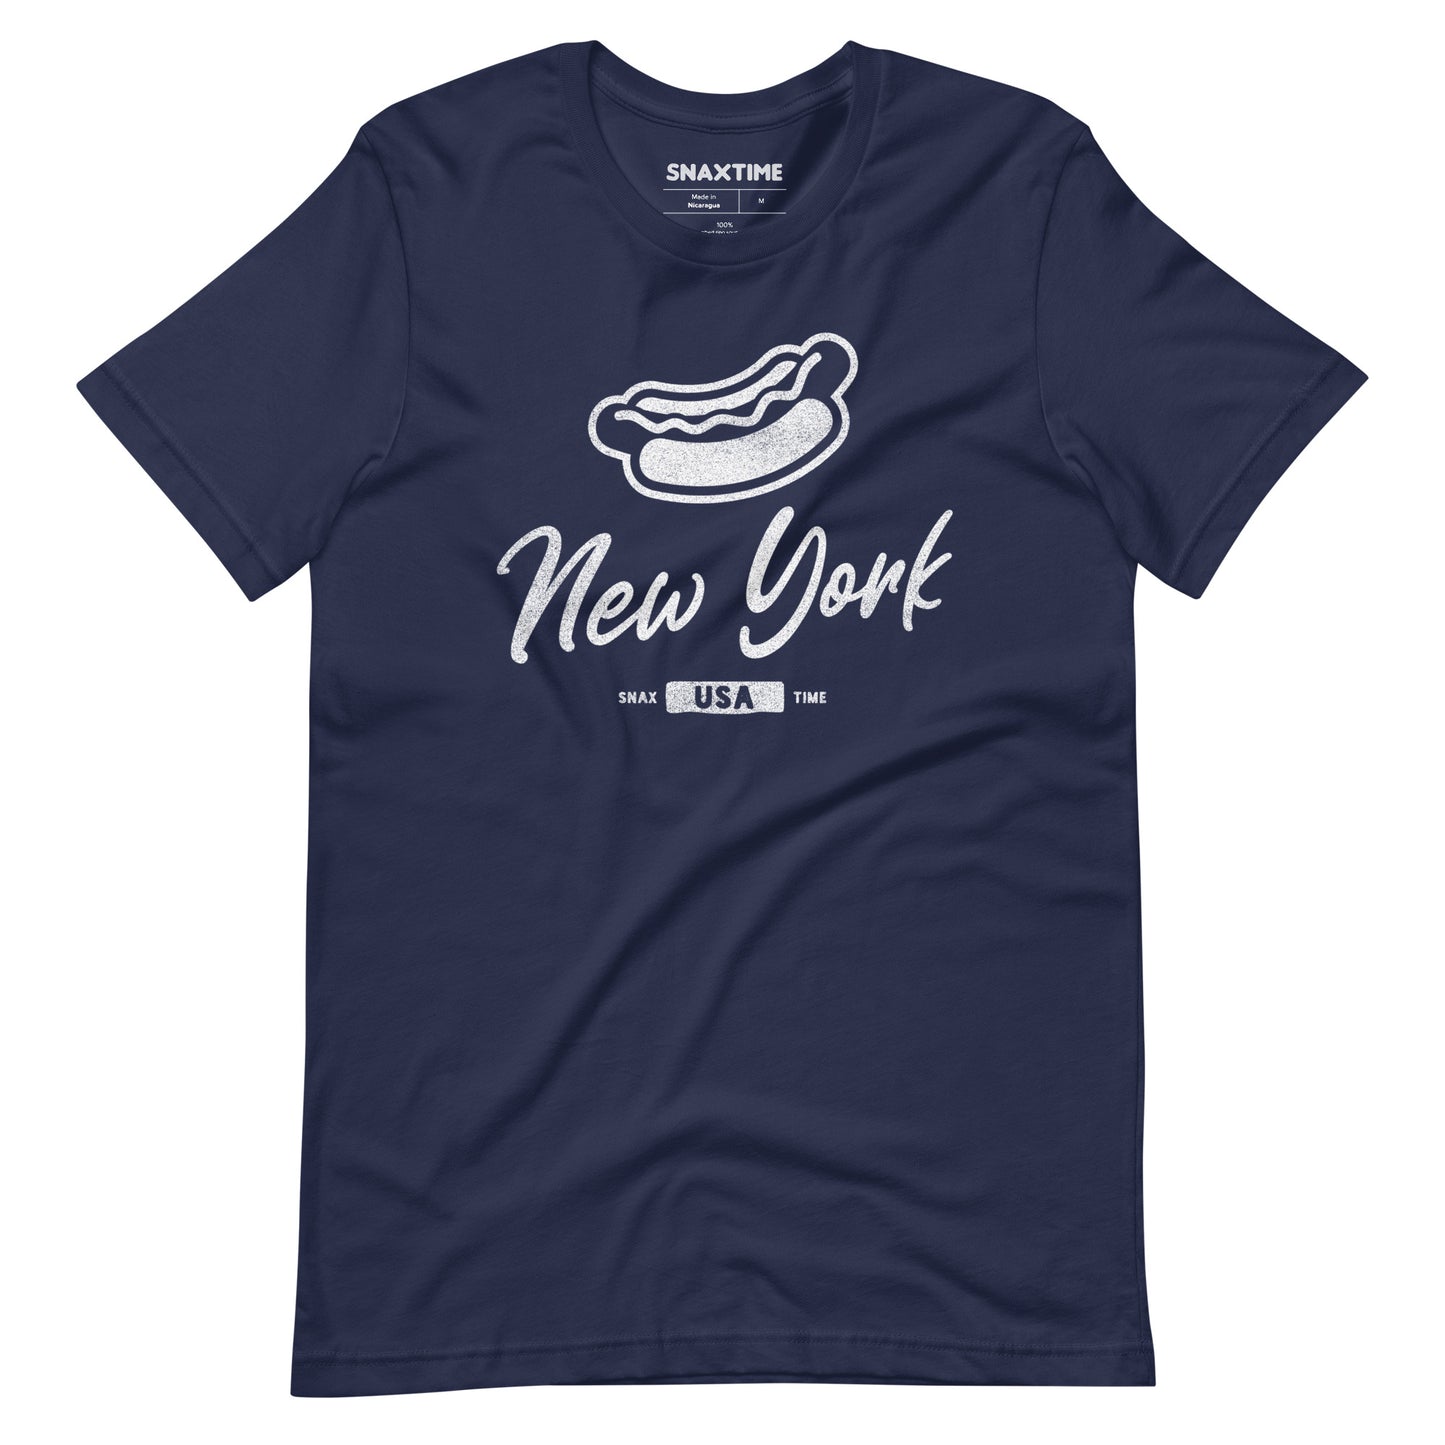 Navy New York City Hot Dog Graphic T-Shirt by Snaxtime